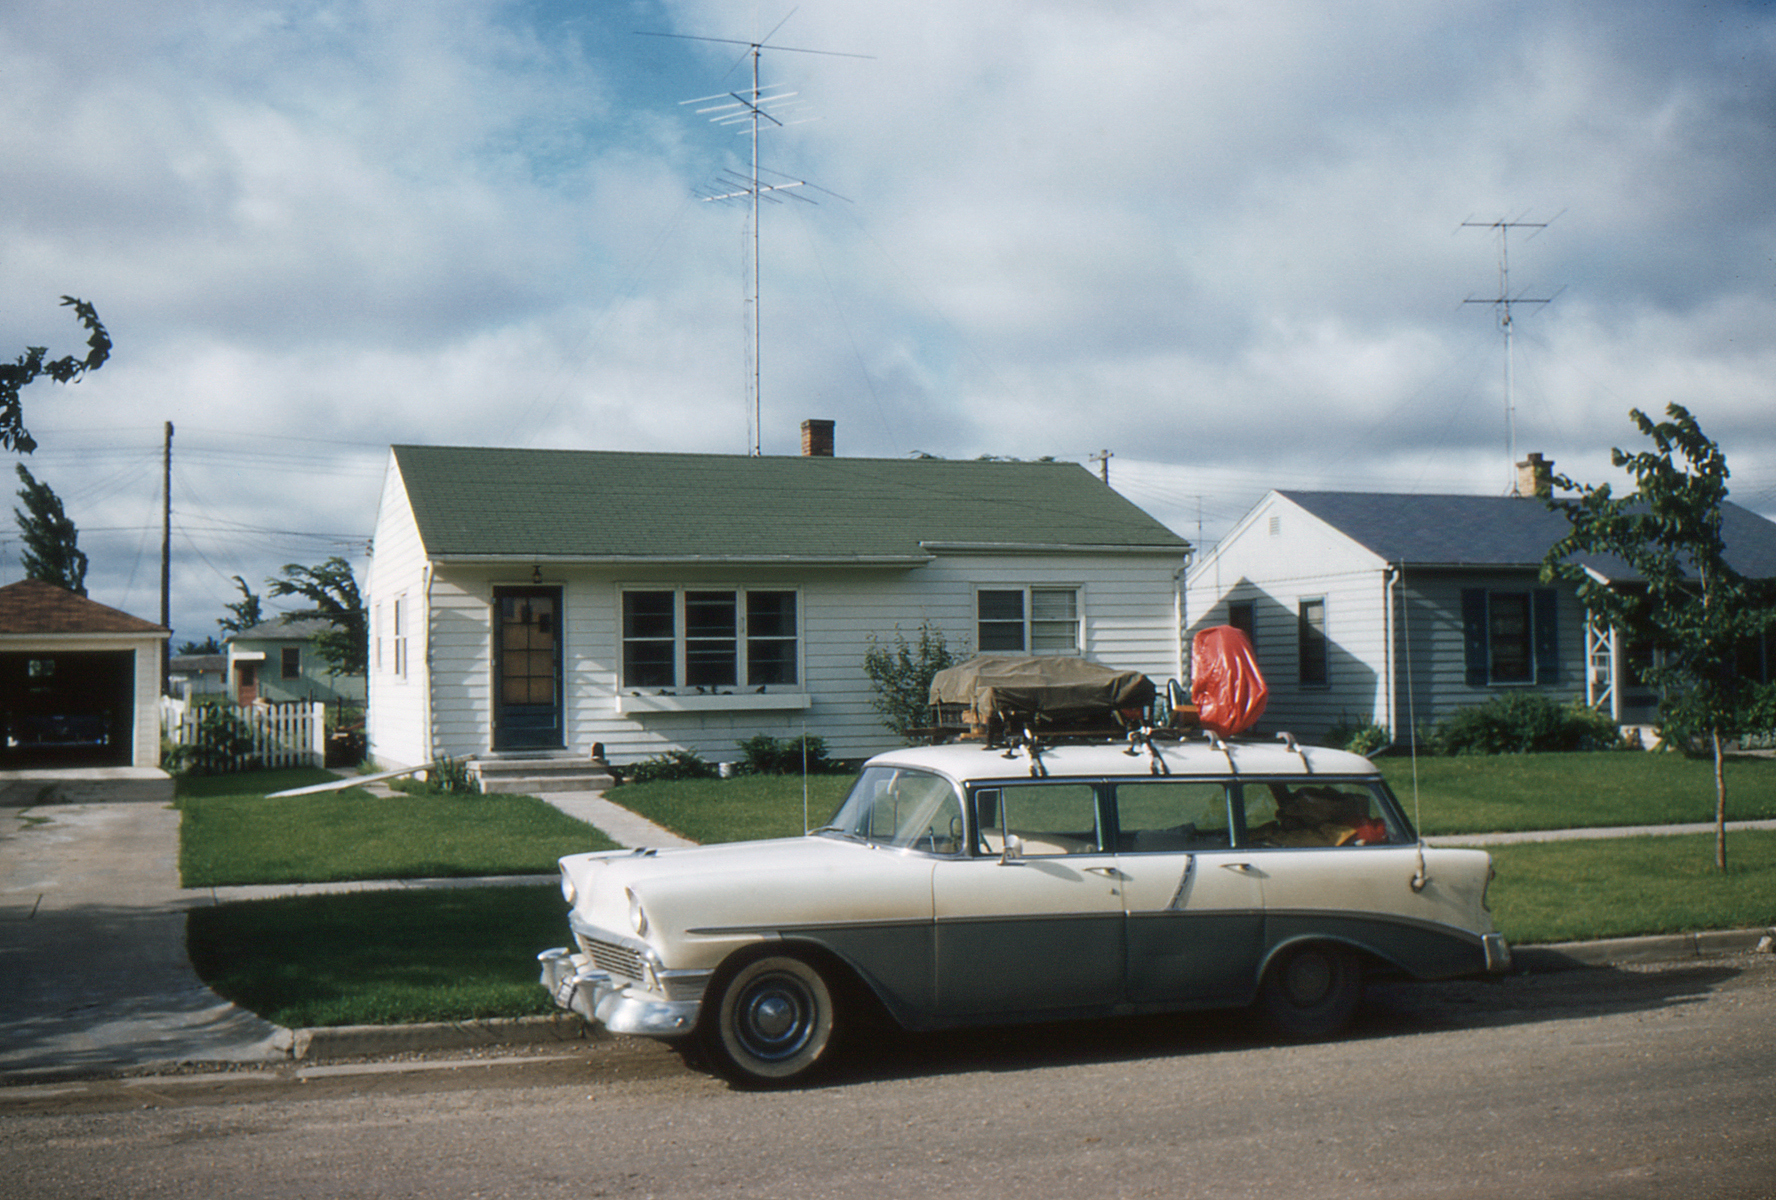 A 1956 Chevrolet station wagon with luggage on top is parked in front of a small single-story house in a suburban neighborhood